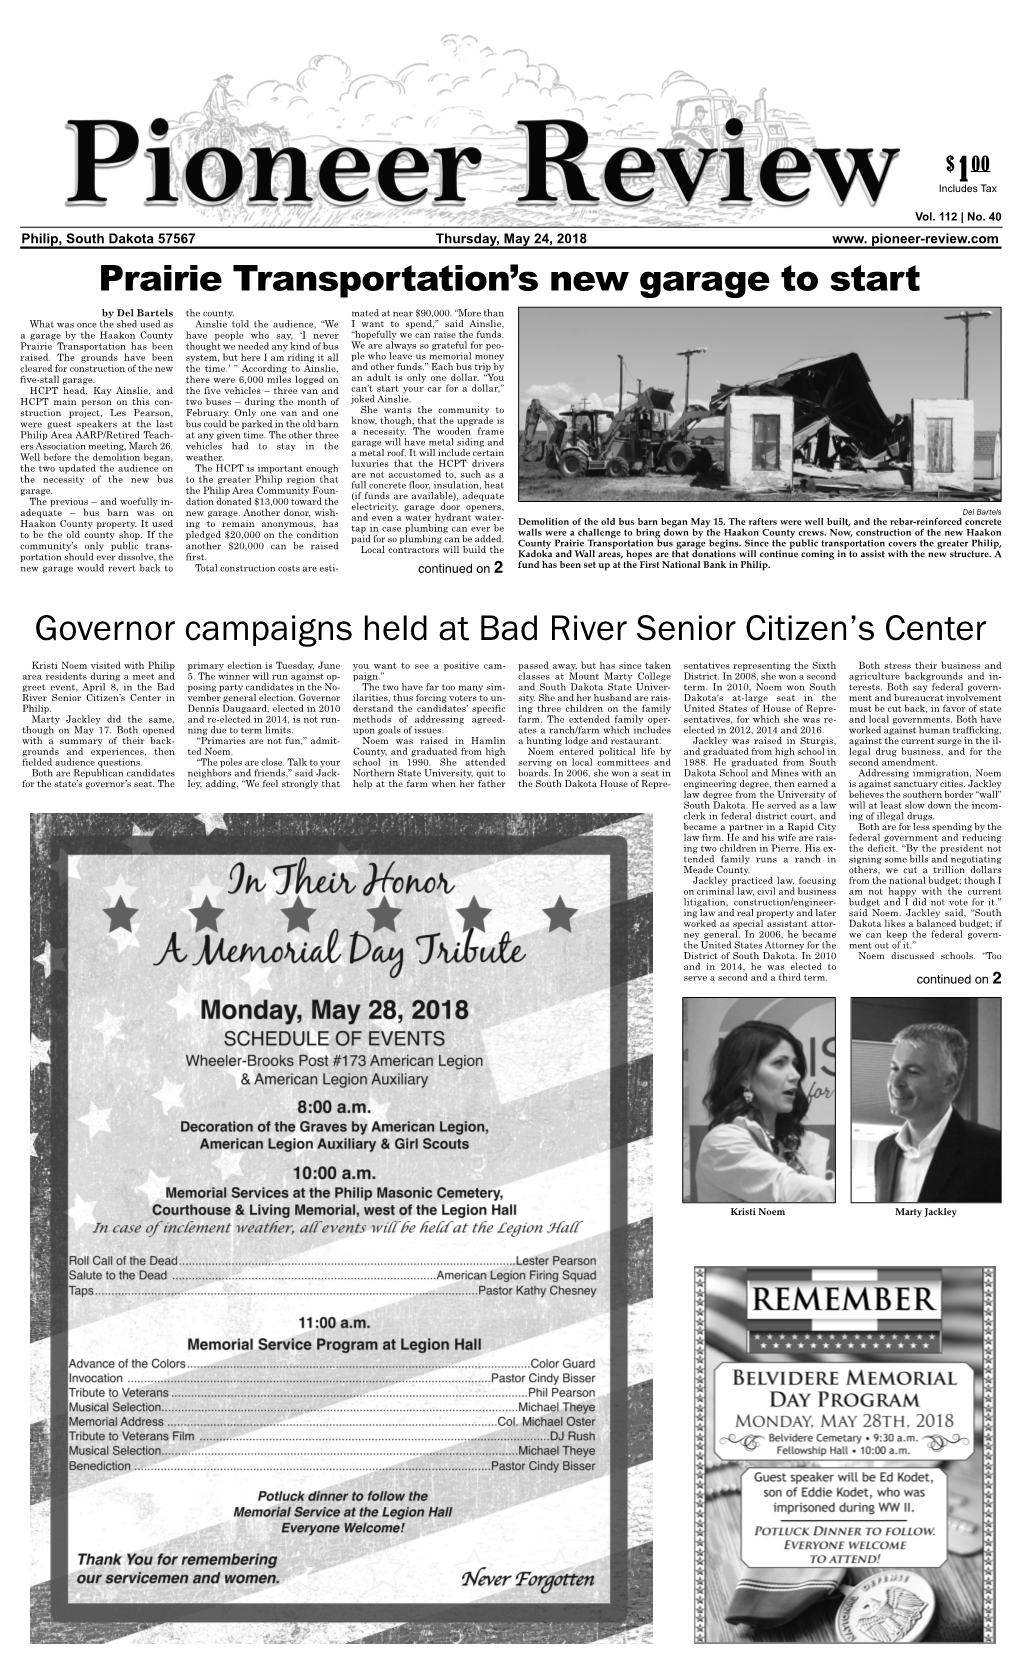 Governor Campaigns Held at Bad River Senior Citizen's Center